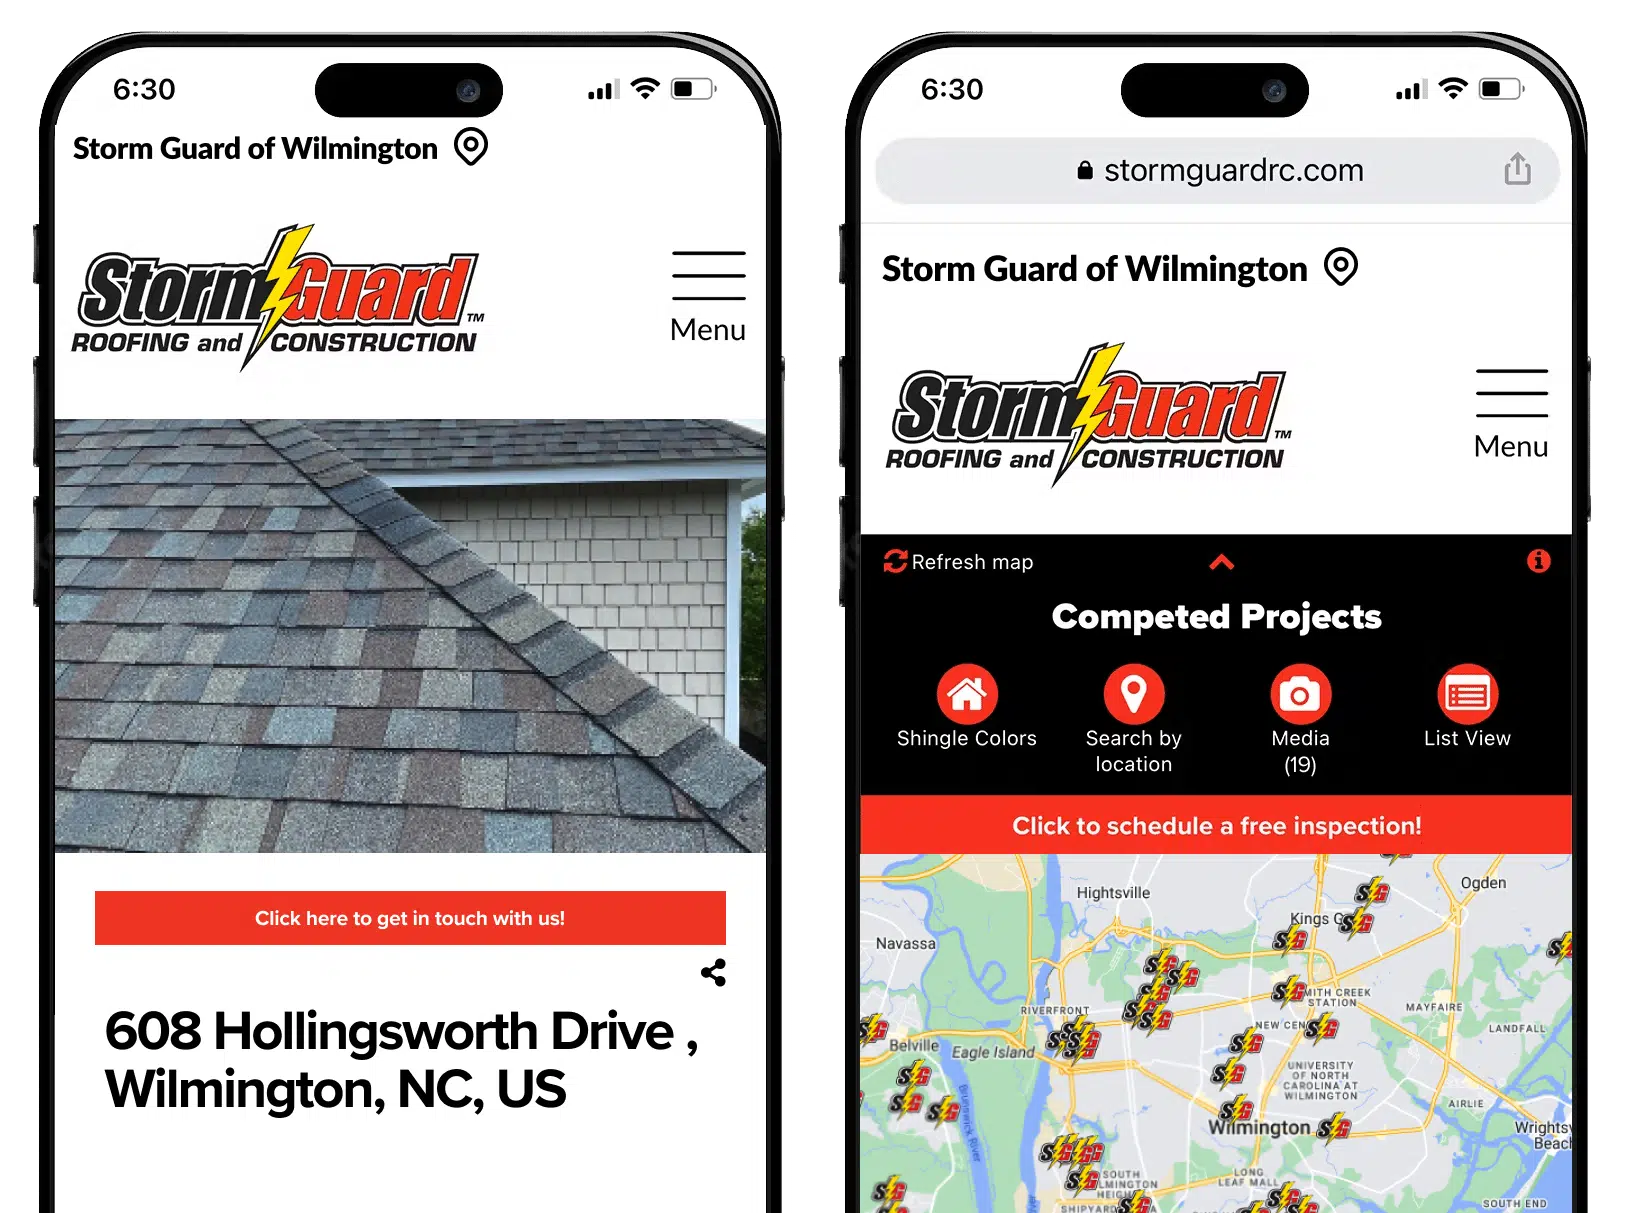 Storm Guard of Wilmington, NC roofing projects